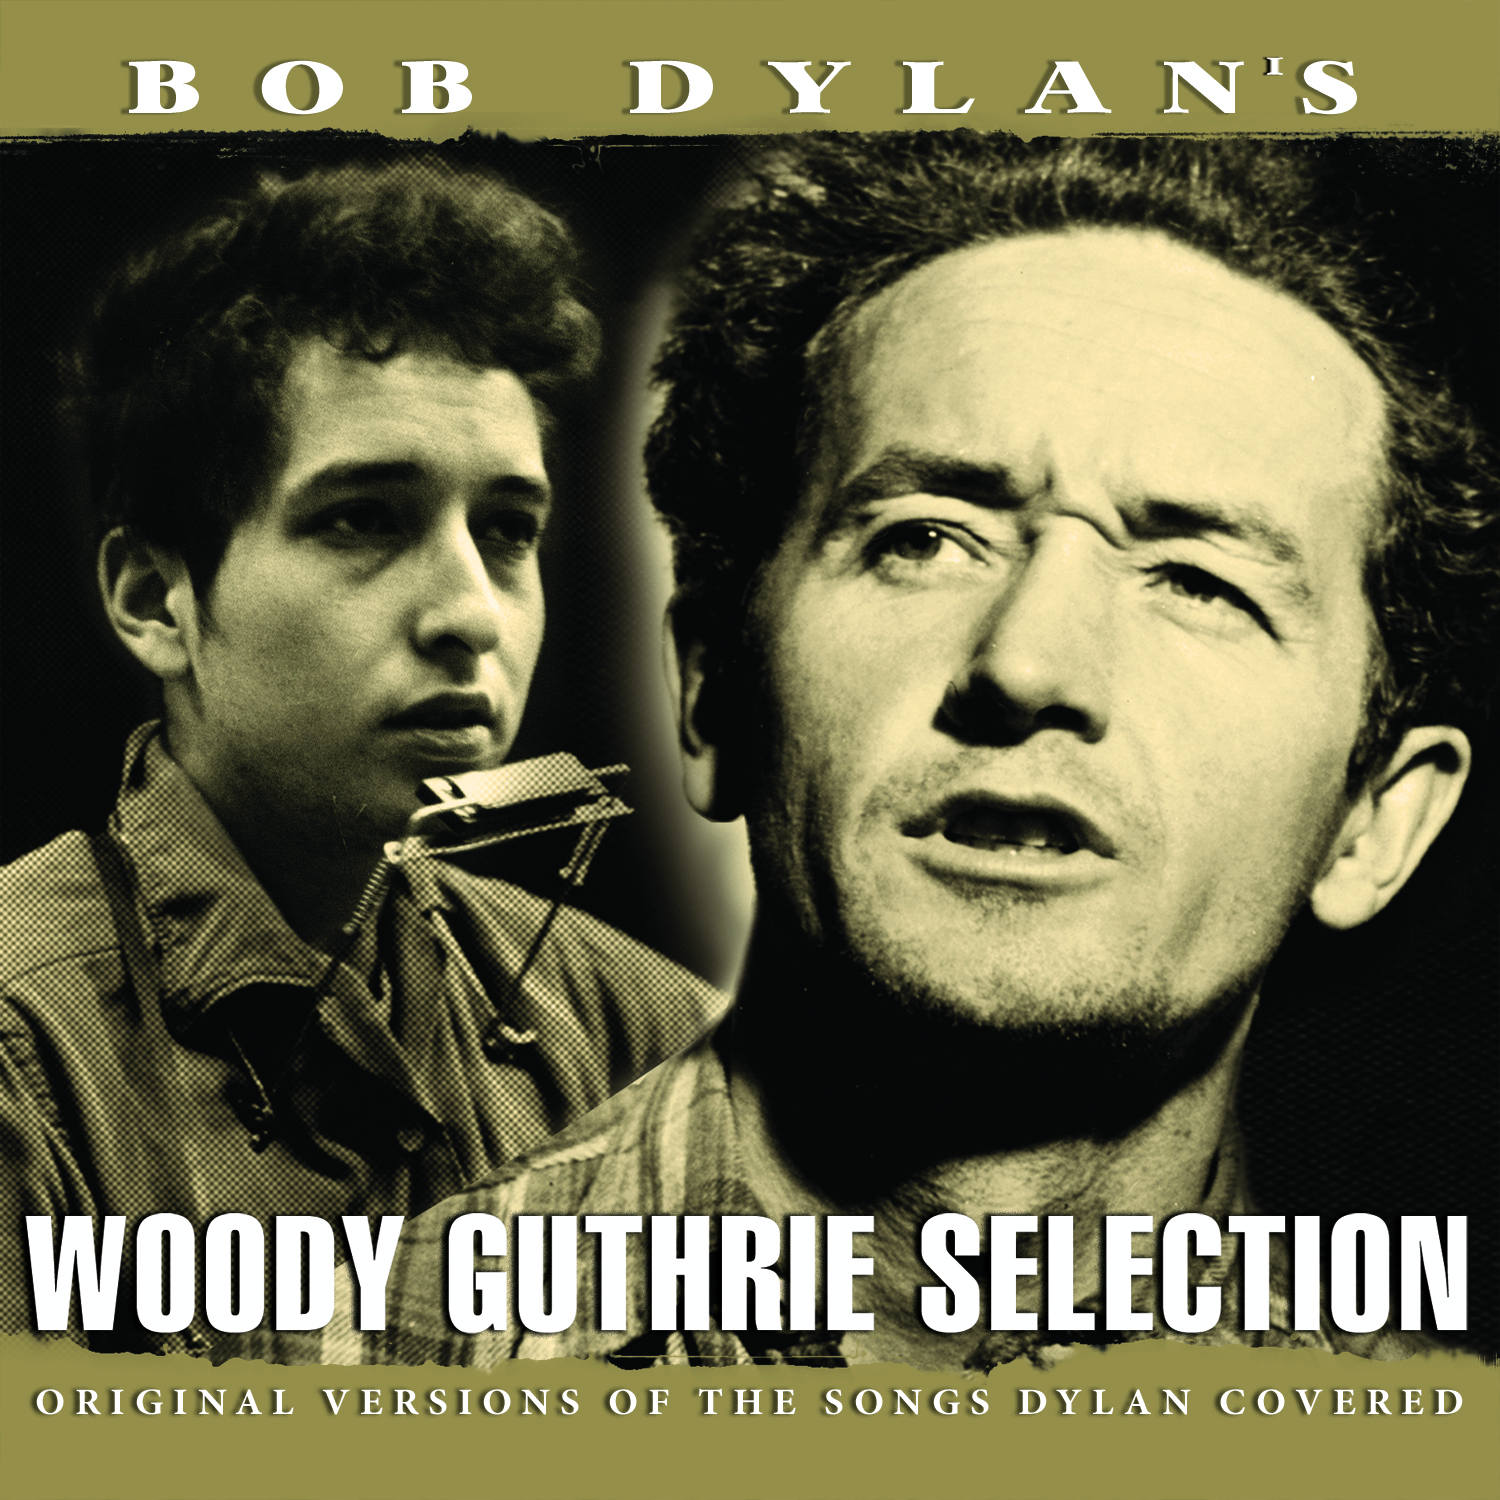 Bob Dylan's Woody Guthrie Selection